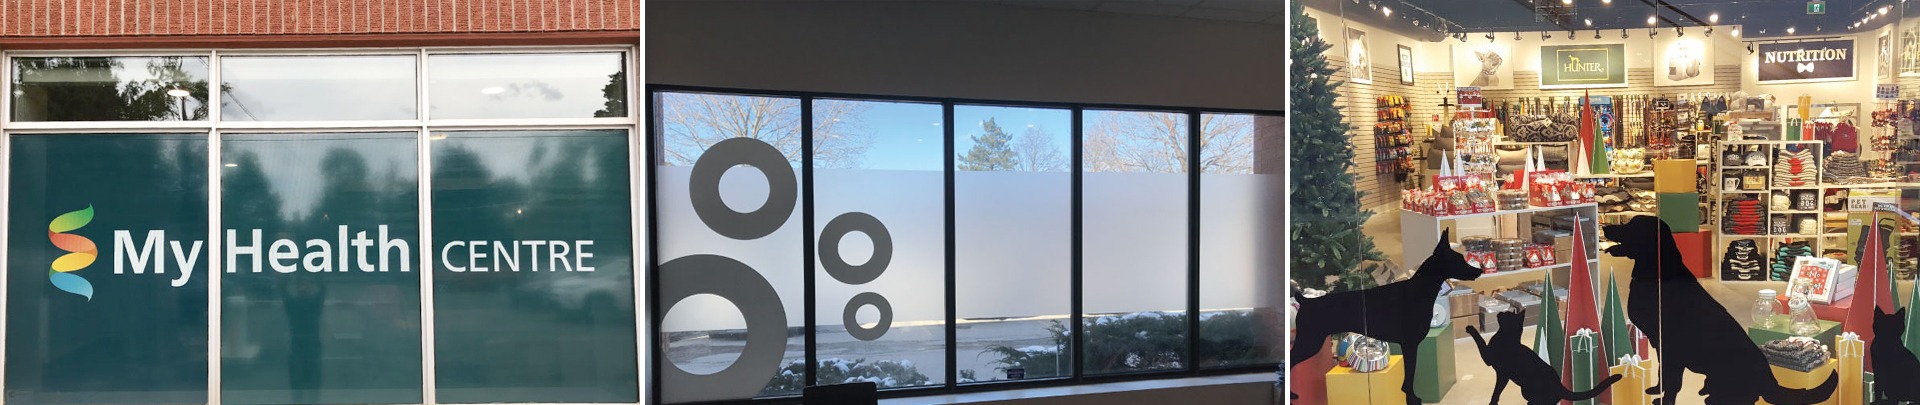 Windows Frosting Film Mississauga: Frosted Window Film Designs | SSK Signs